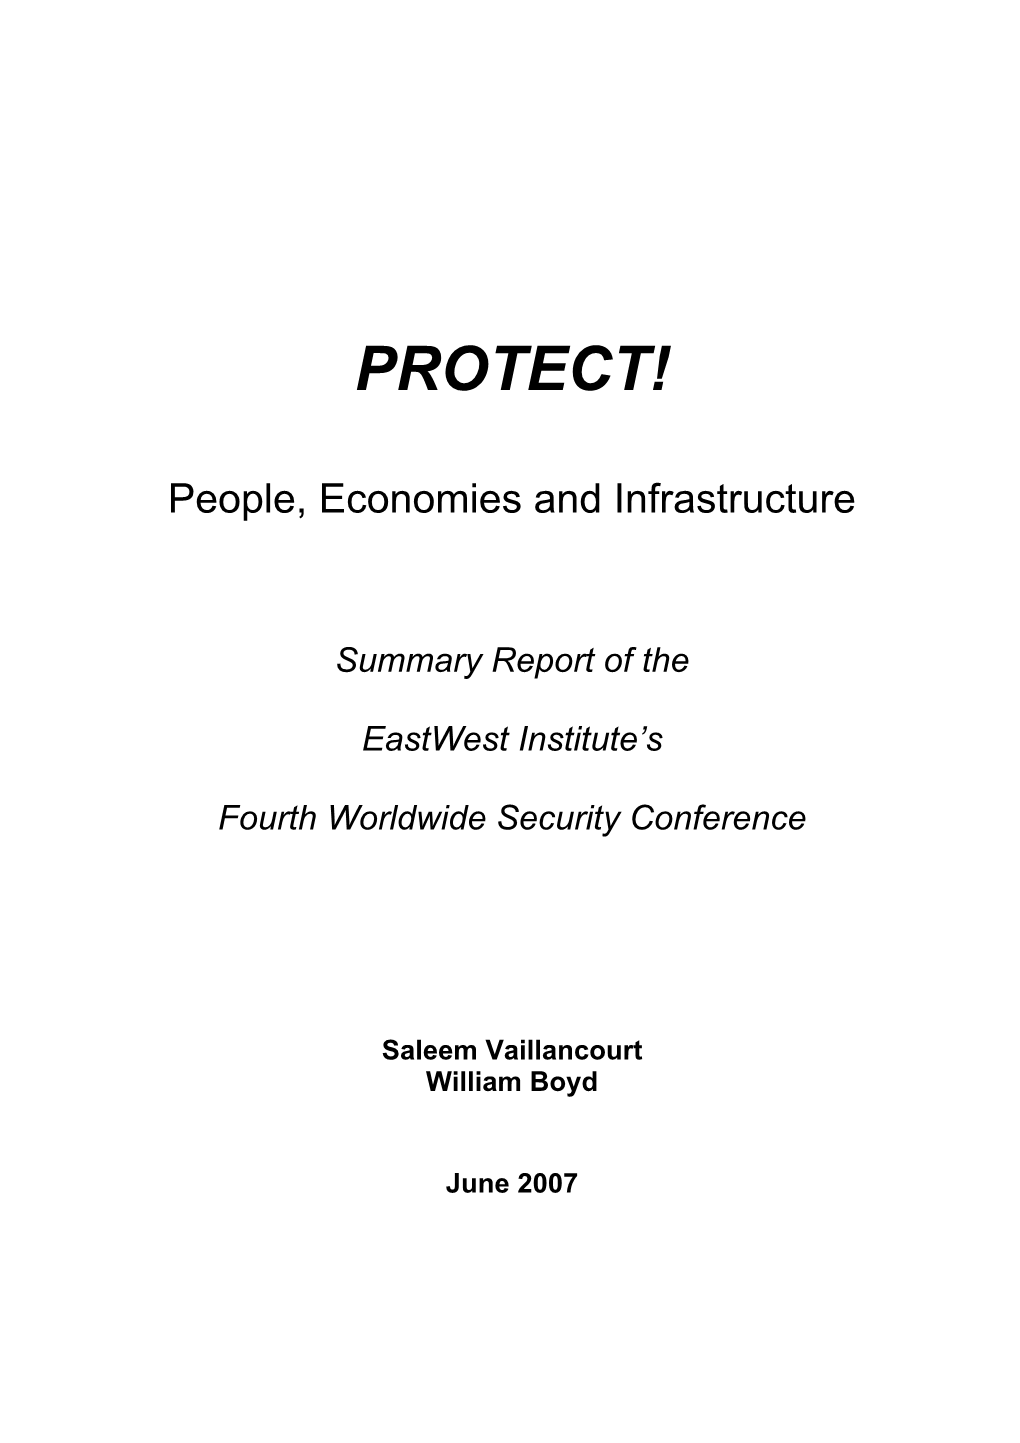 Protect! People, Economies and Infrastructure